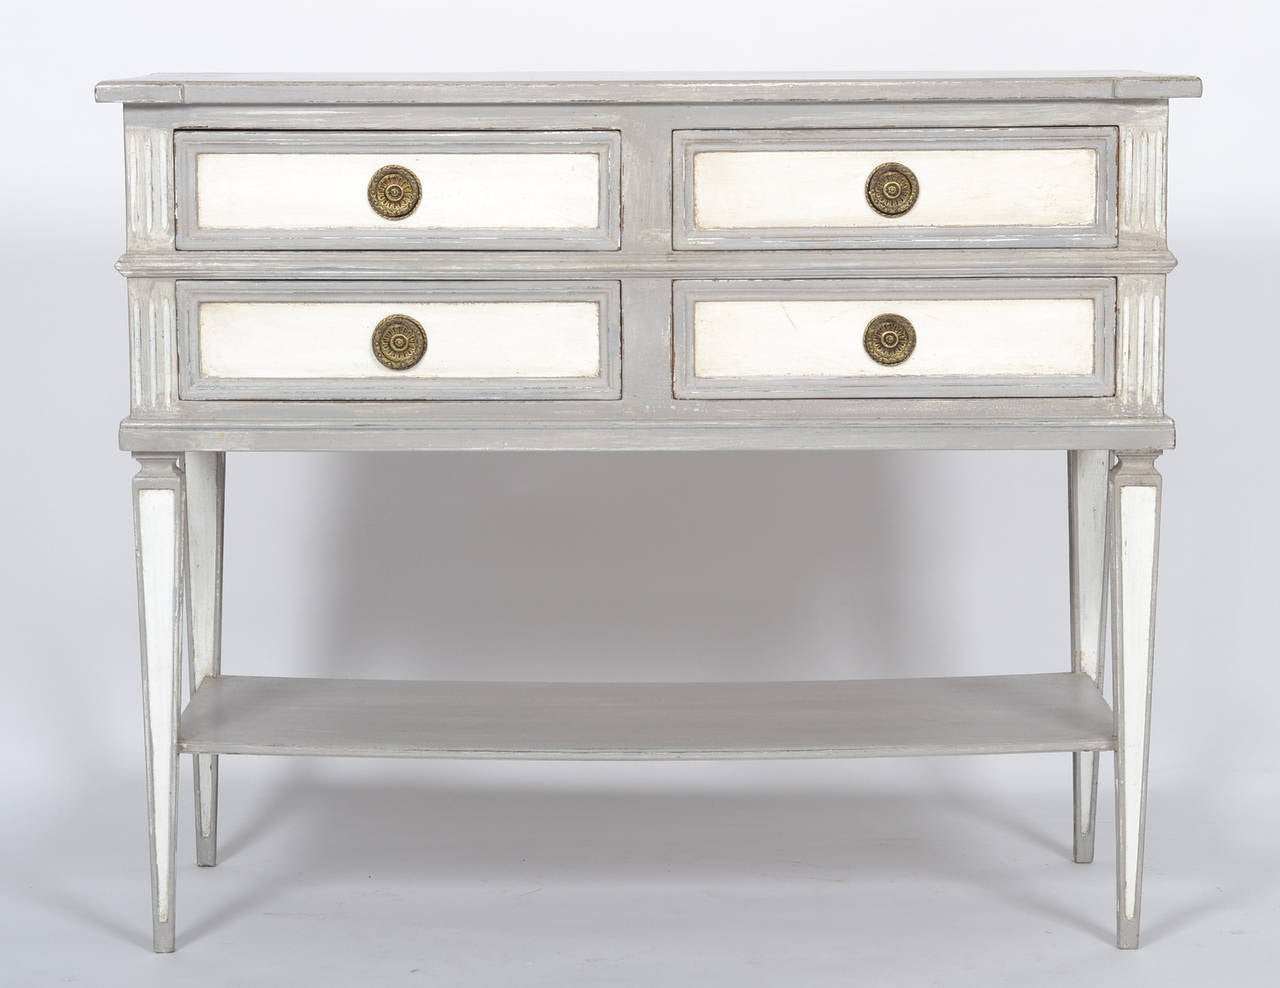 Patinated Faux Pair of French Directoire Style Console Tables with Drawers